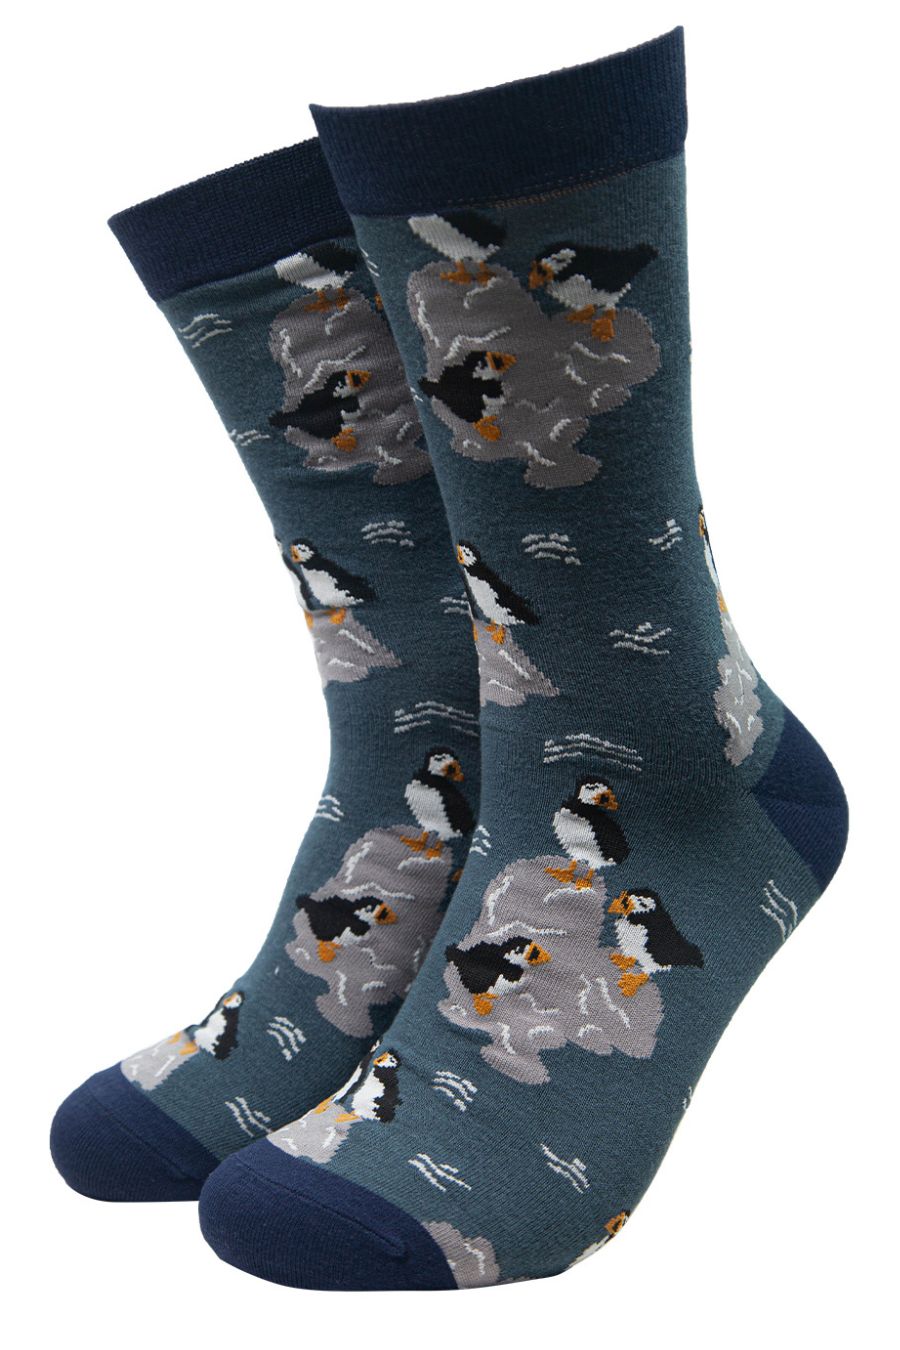 blue dress socks with puffins all over